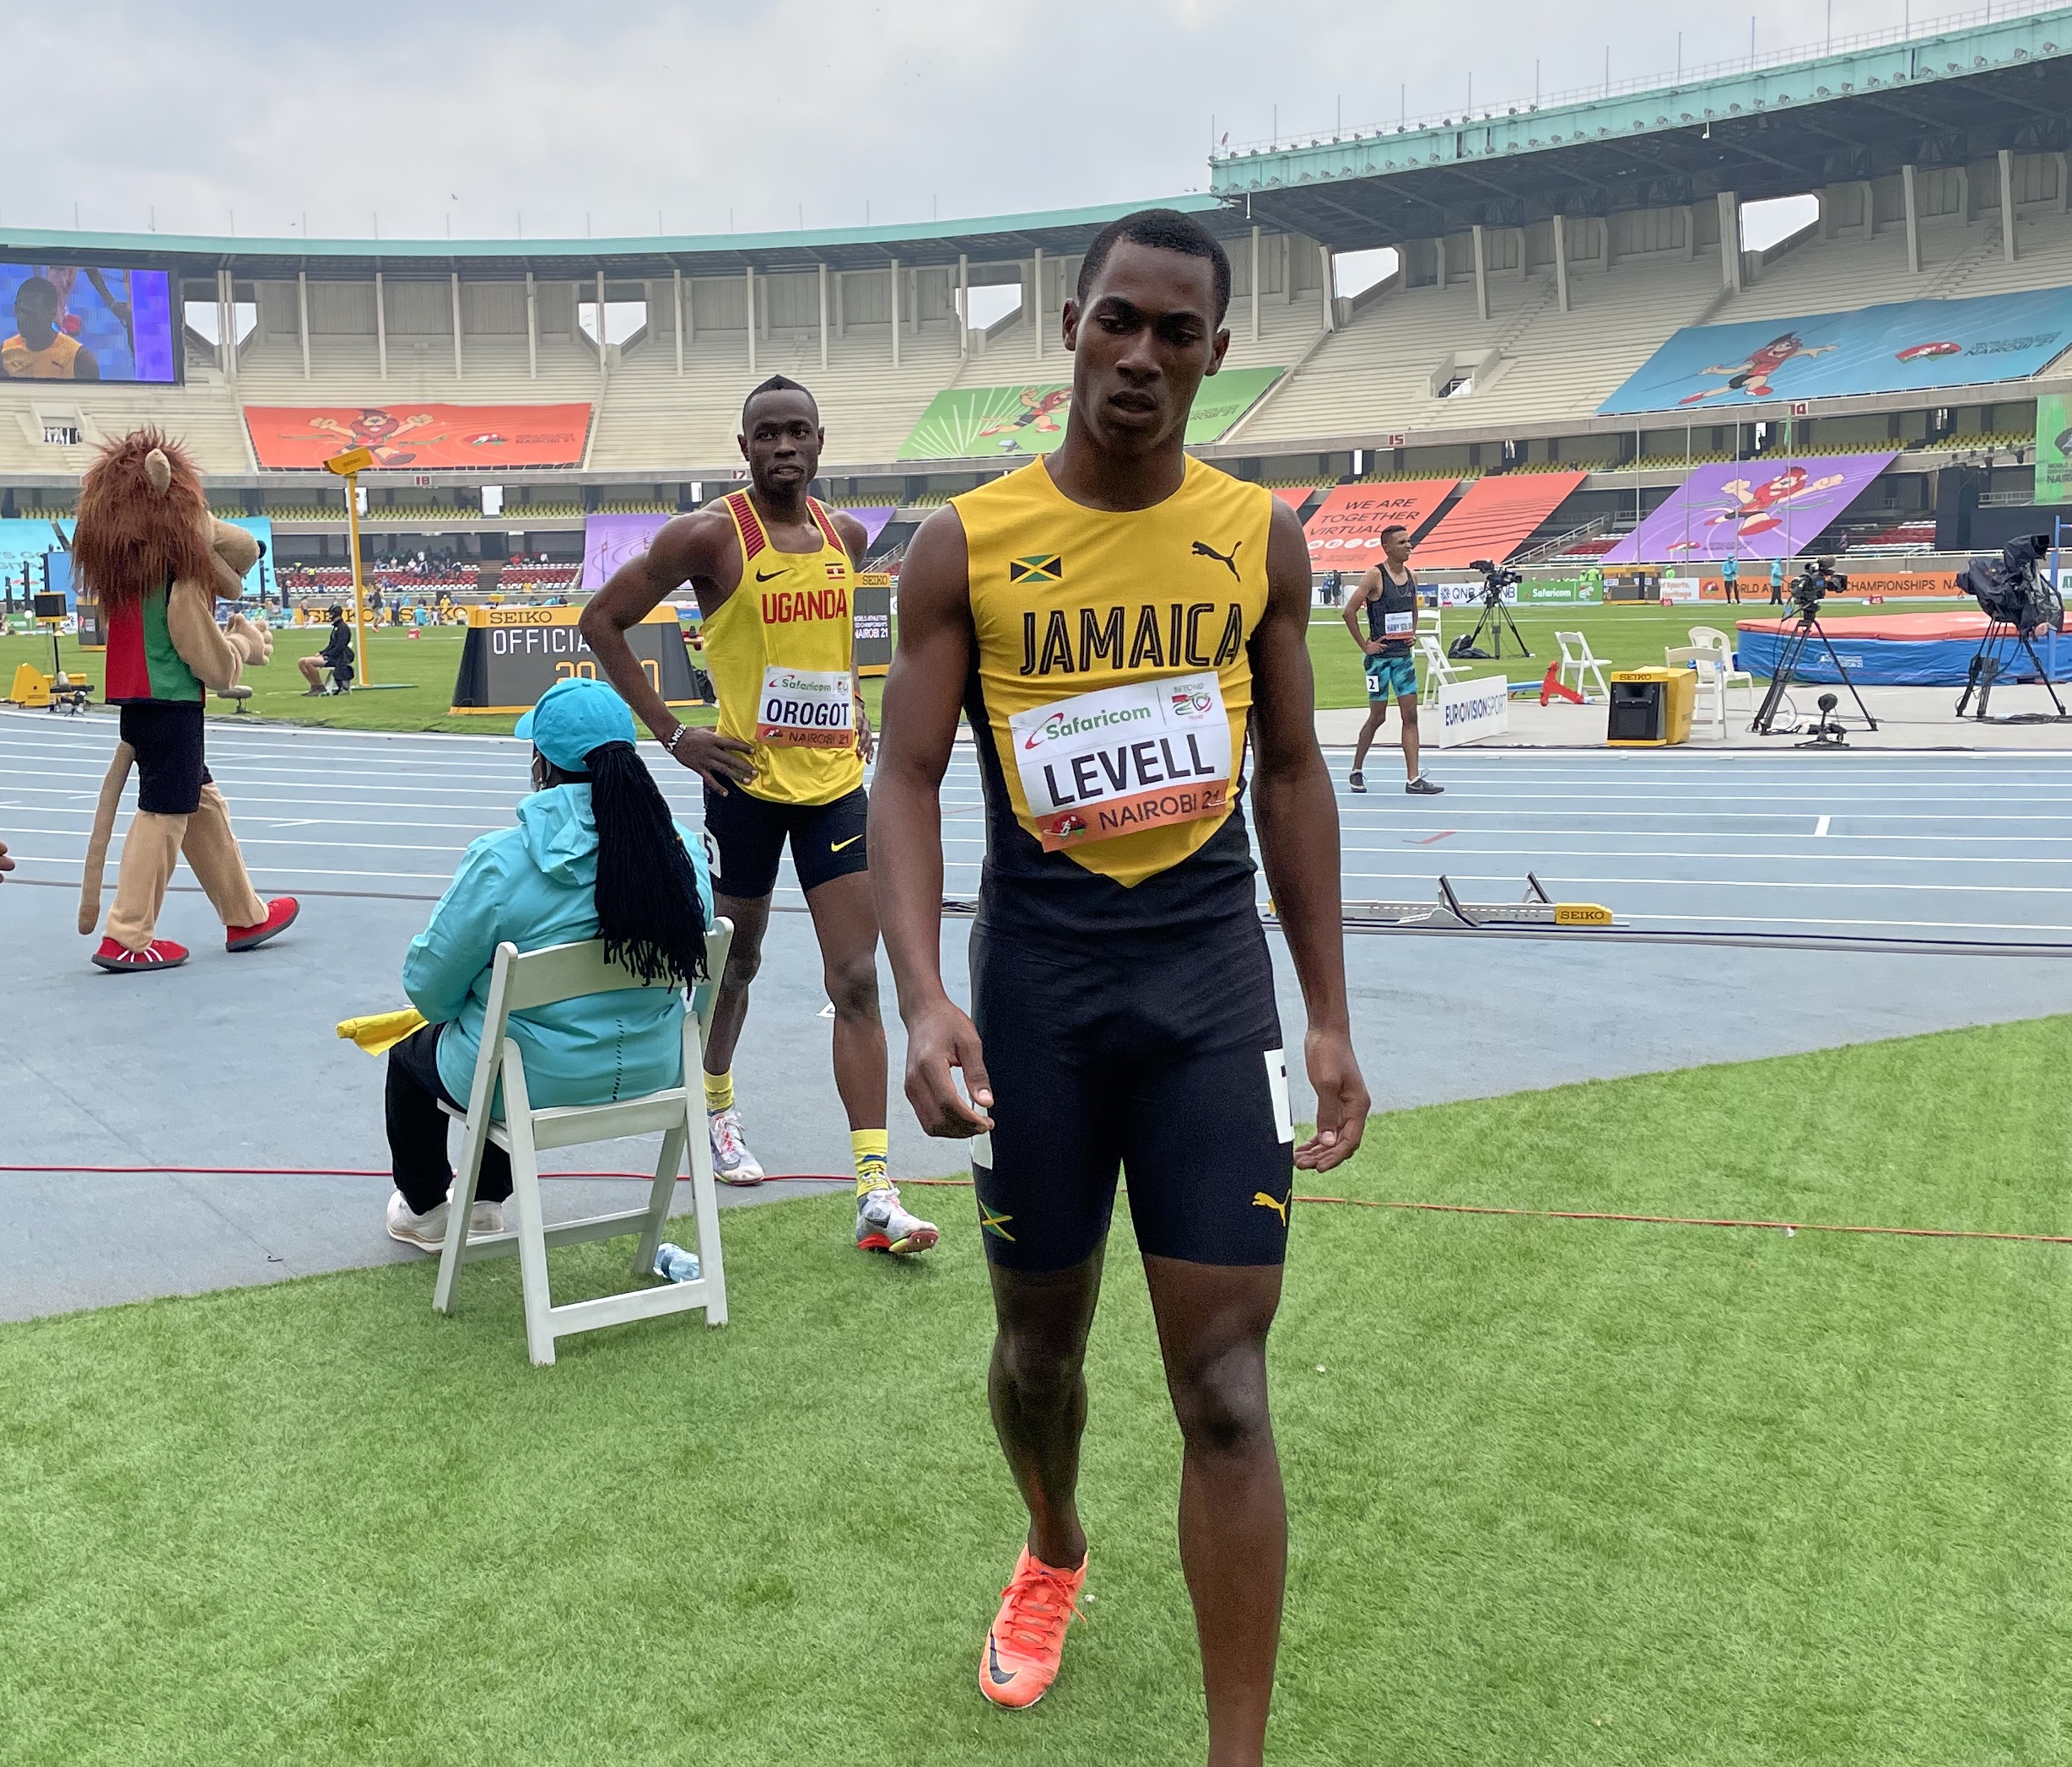 Bryan Levell advance in 200m at World Athletics U20 Championships for Carifta Games Trials #champs2022 Champs 2022